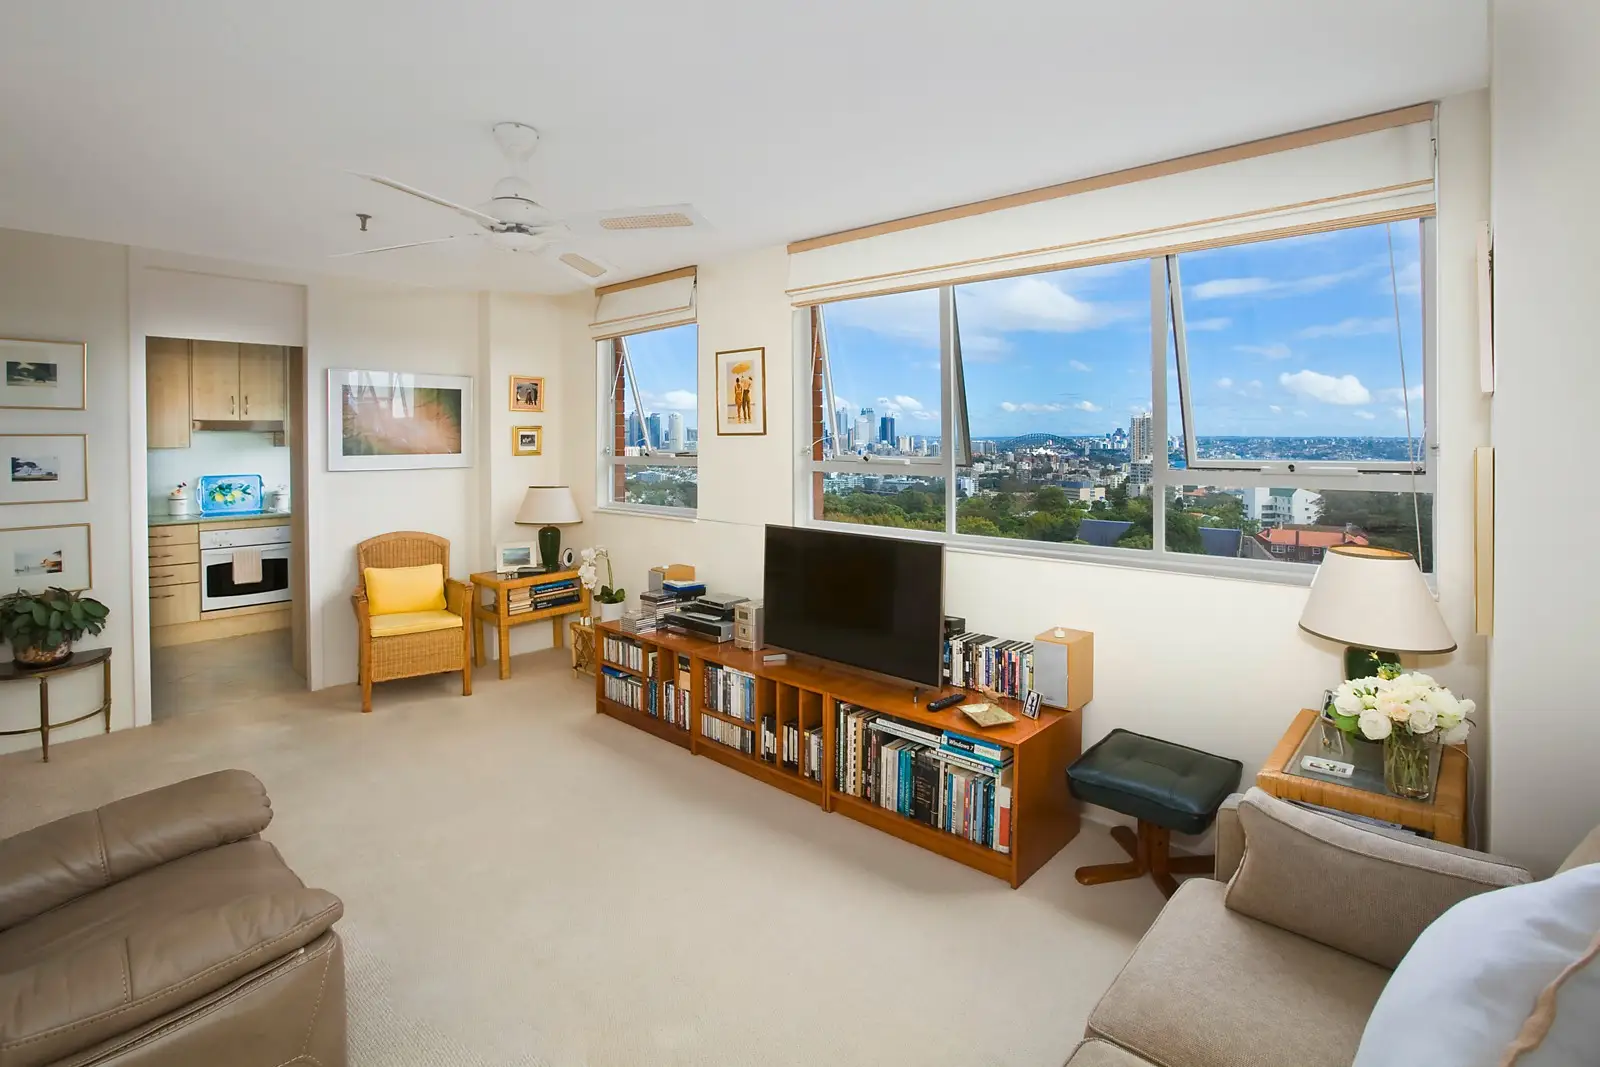 Photo #3: 55/8 Fullerton Street, Woollahra - Sold by Sydney Sotheby's International Realty